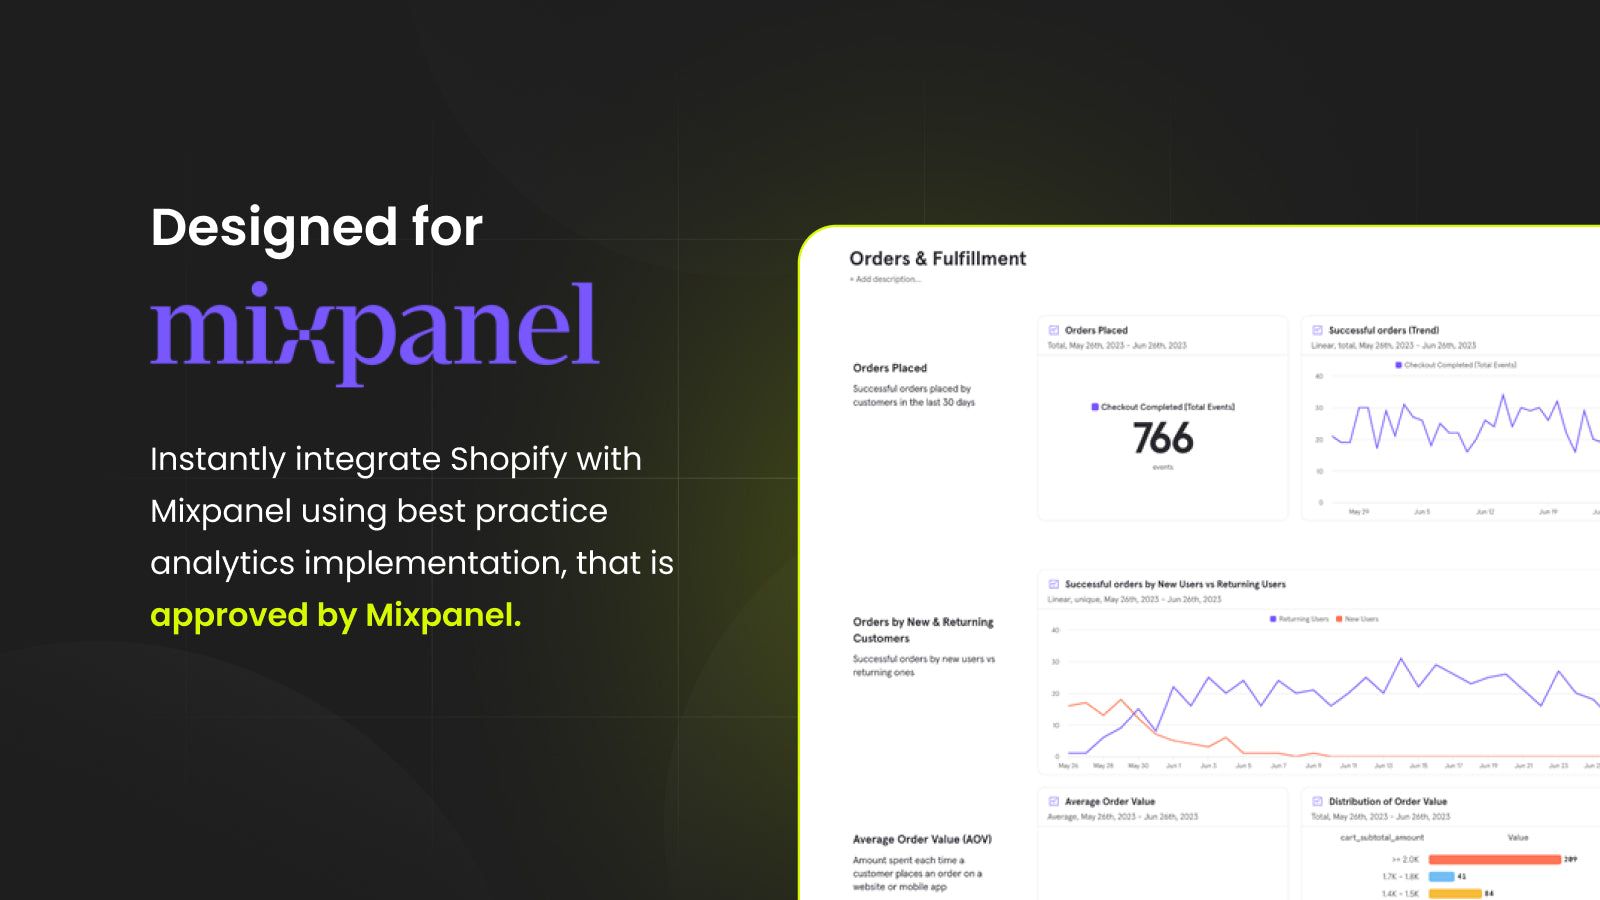 Designed for Mixpanel